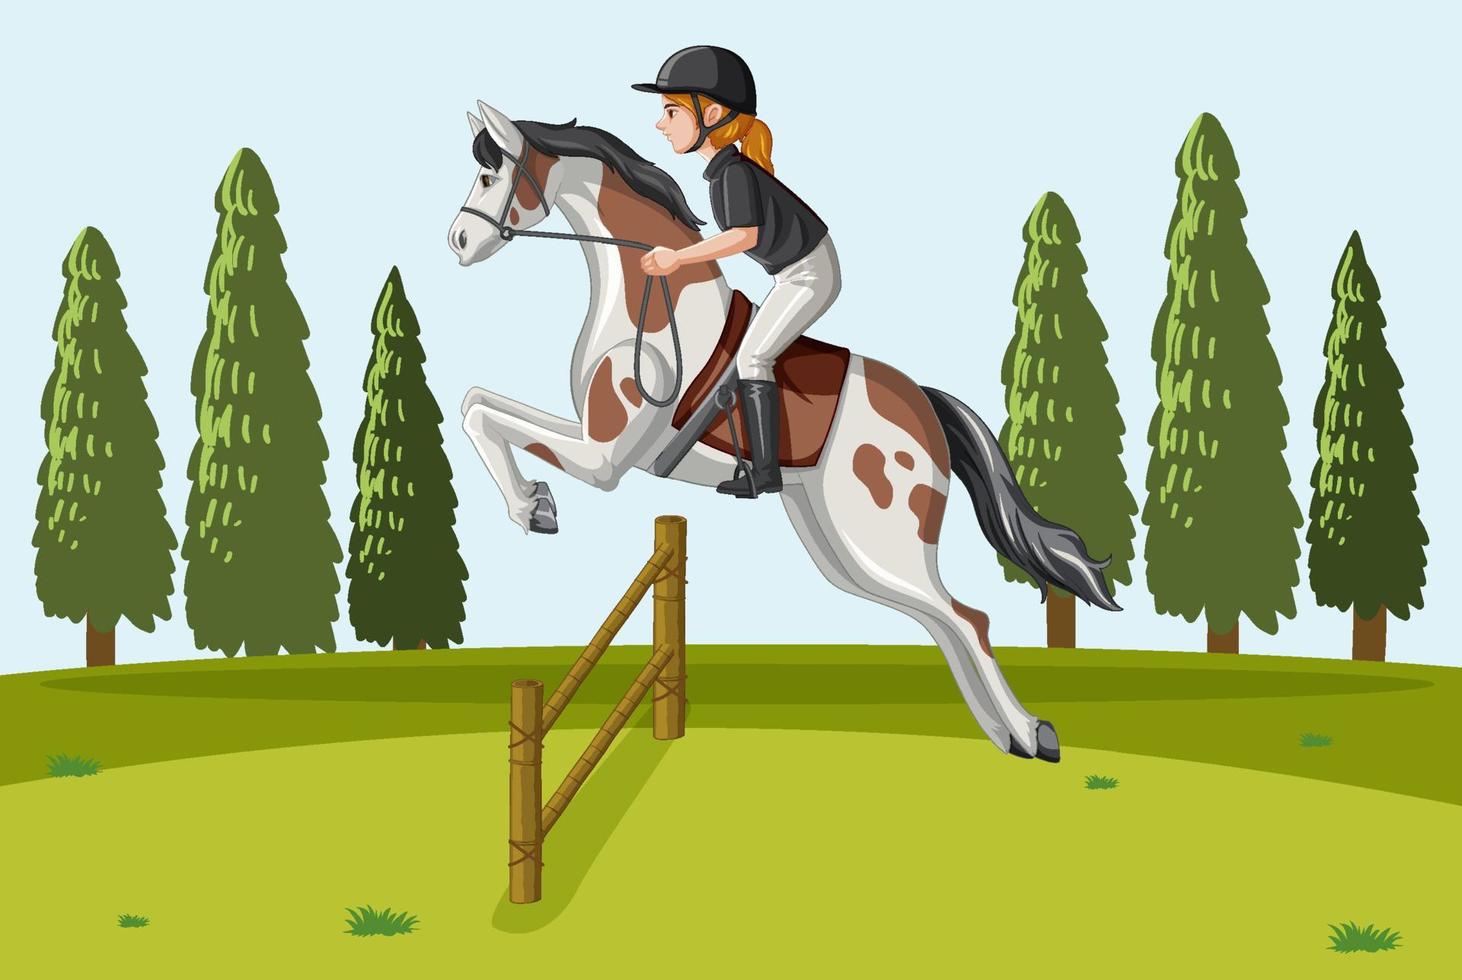 Outdoor background with a woman riding horse vector